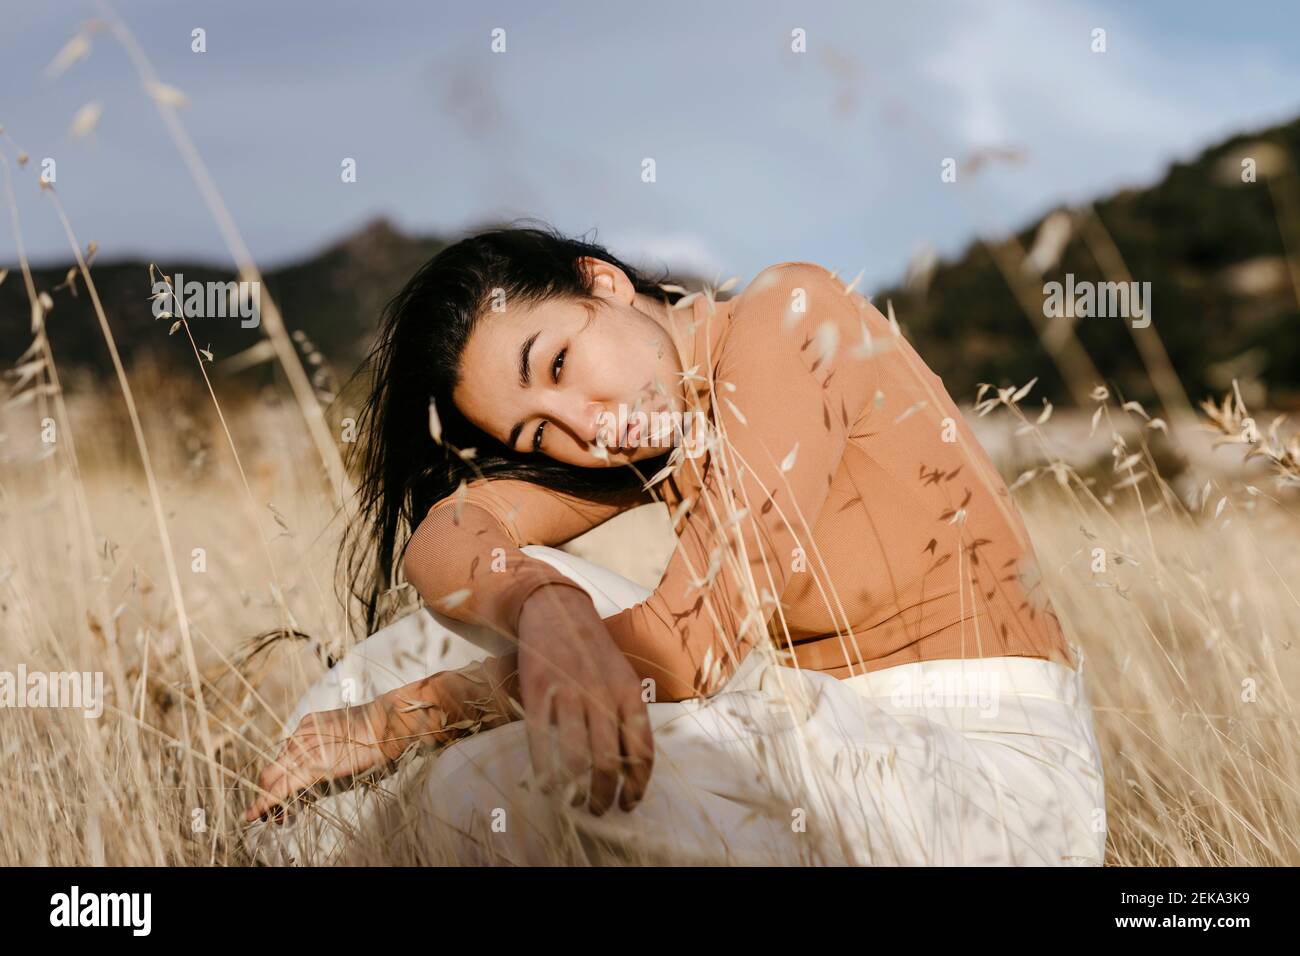 Young woman sitting amidst grass in field against sky during sunset Stock Photo